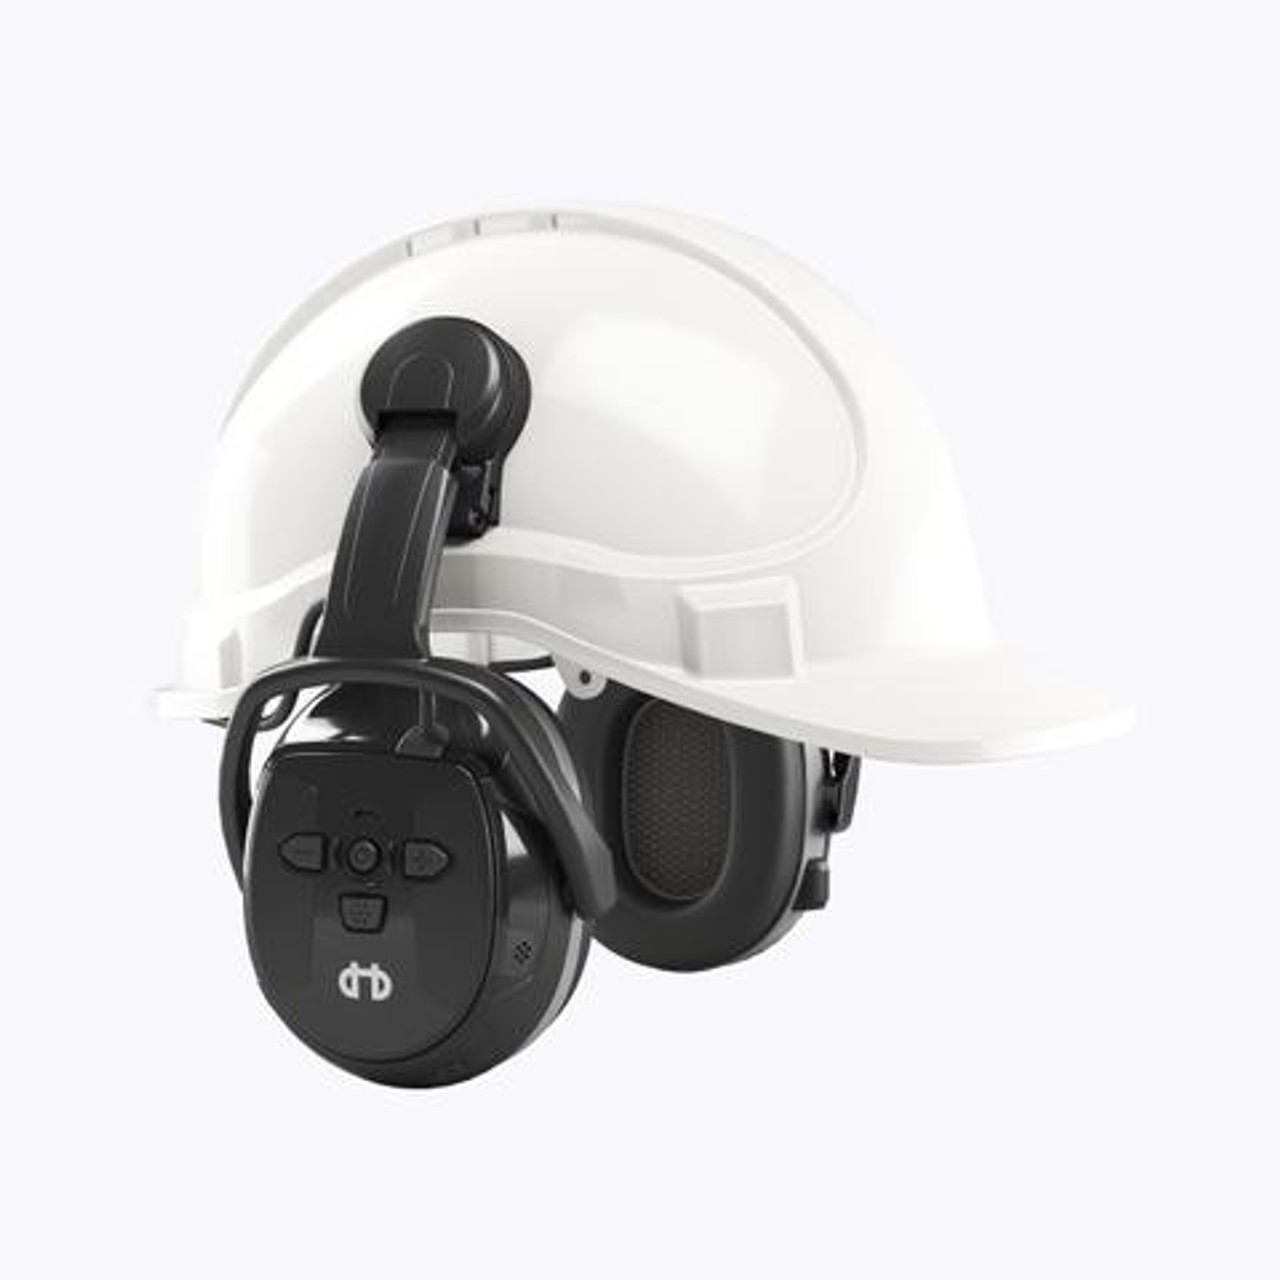 HELLBERG Hearing Protection | XSTREAM LD Bluetooth Earmuffs Hearing Protection with Active Monitoring and Waterproof in Helmet Version